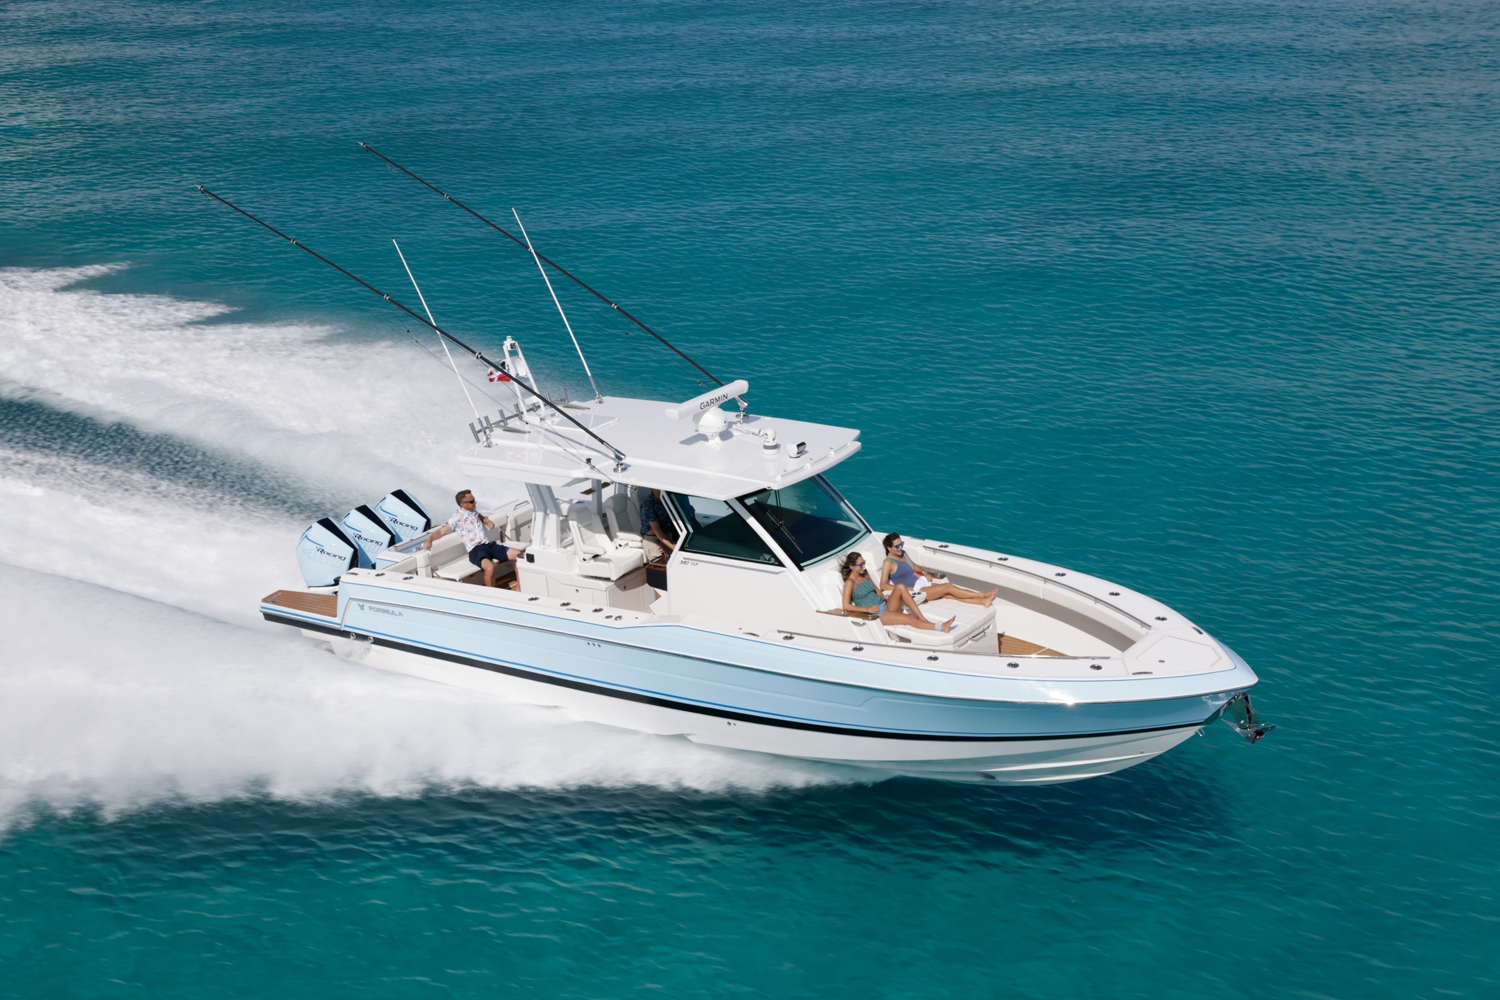 38 ft Luxury Fishing Boat - 387 Center Console Fish